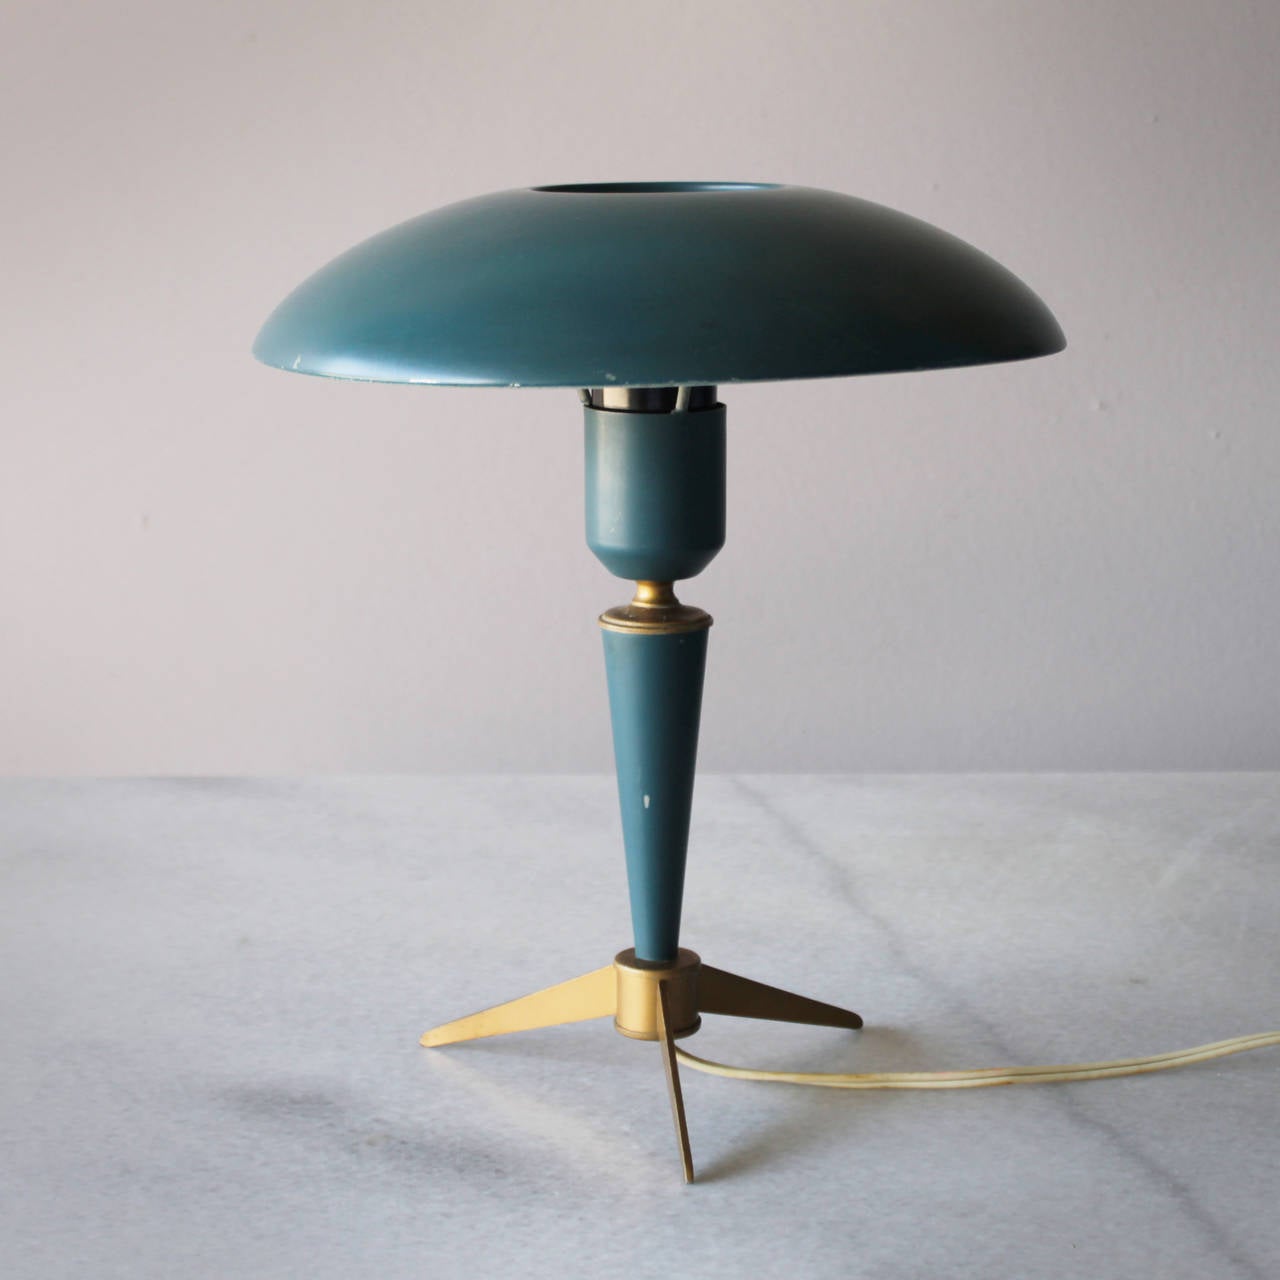 Three tripod table lamps by Louis Kalff for Philips, Dutch, 1950s. Produced in Belgium. They are different very slightly in color. Marked.

The architect and designer Louis Kalff (1897-1976) joined Philips in 1925. Kalff set out to modernize the